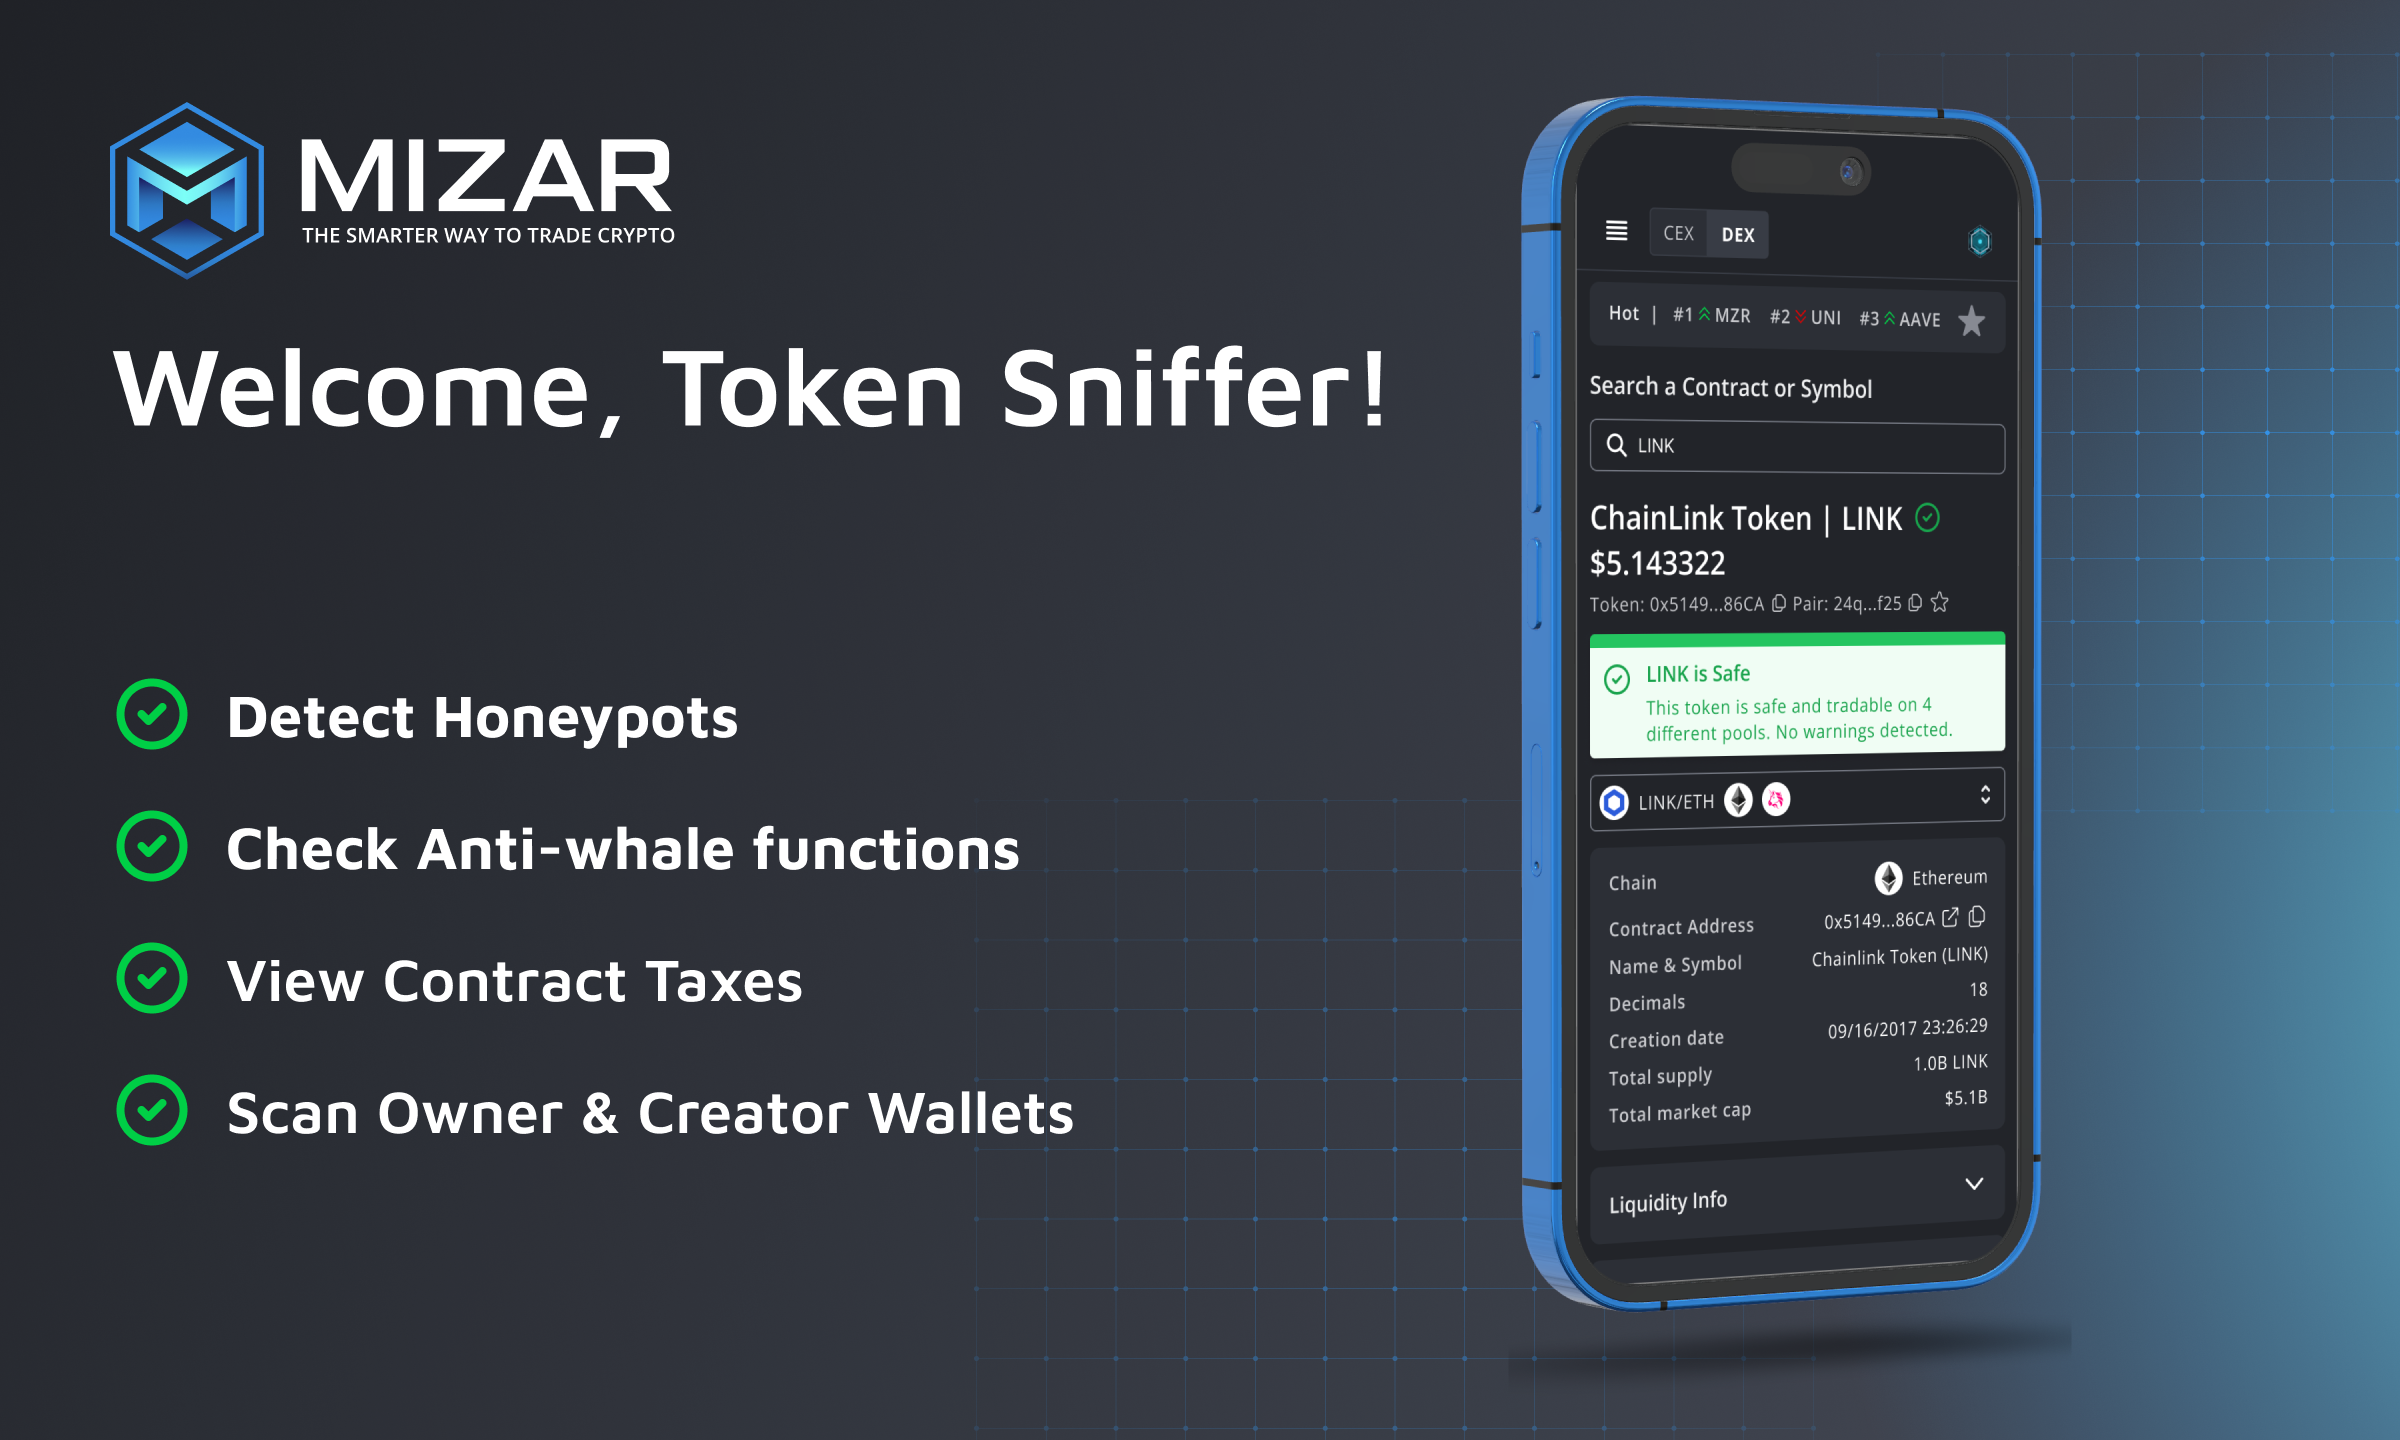 We're happy to announce that the Token Sniffer has been released